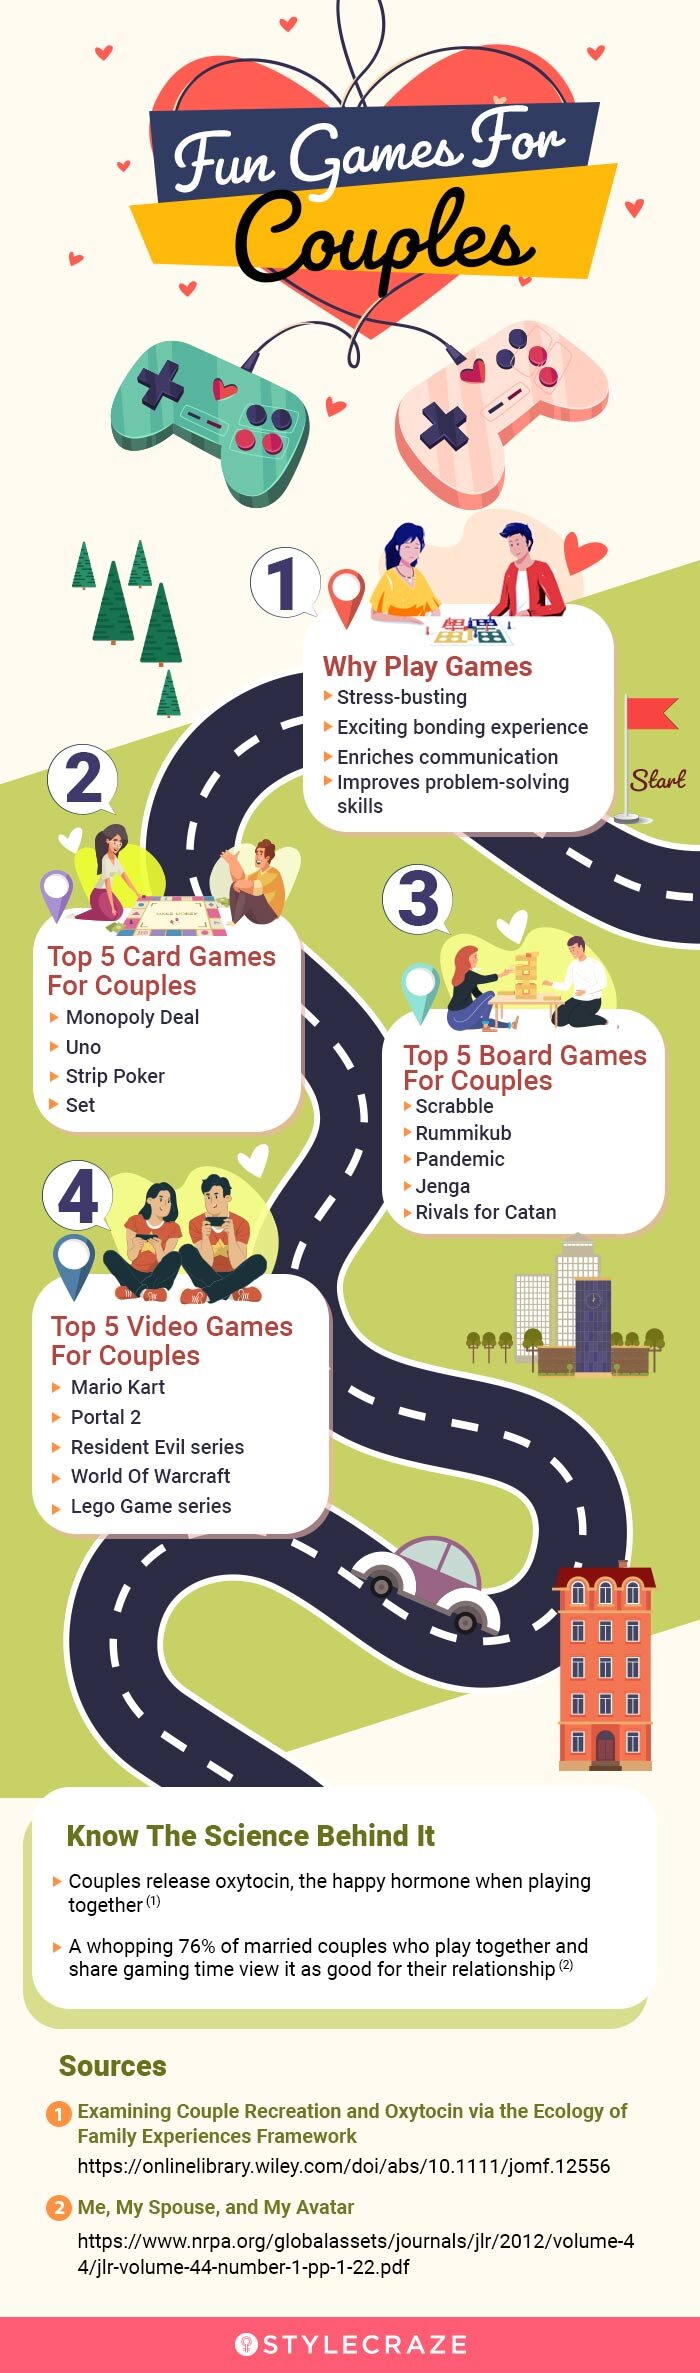 fun games for couples [infographic]